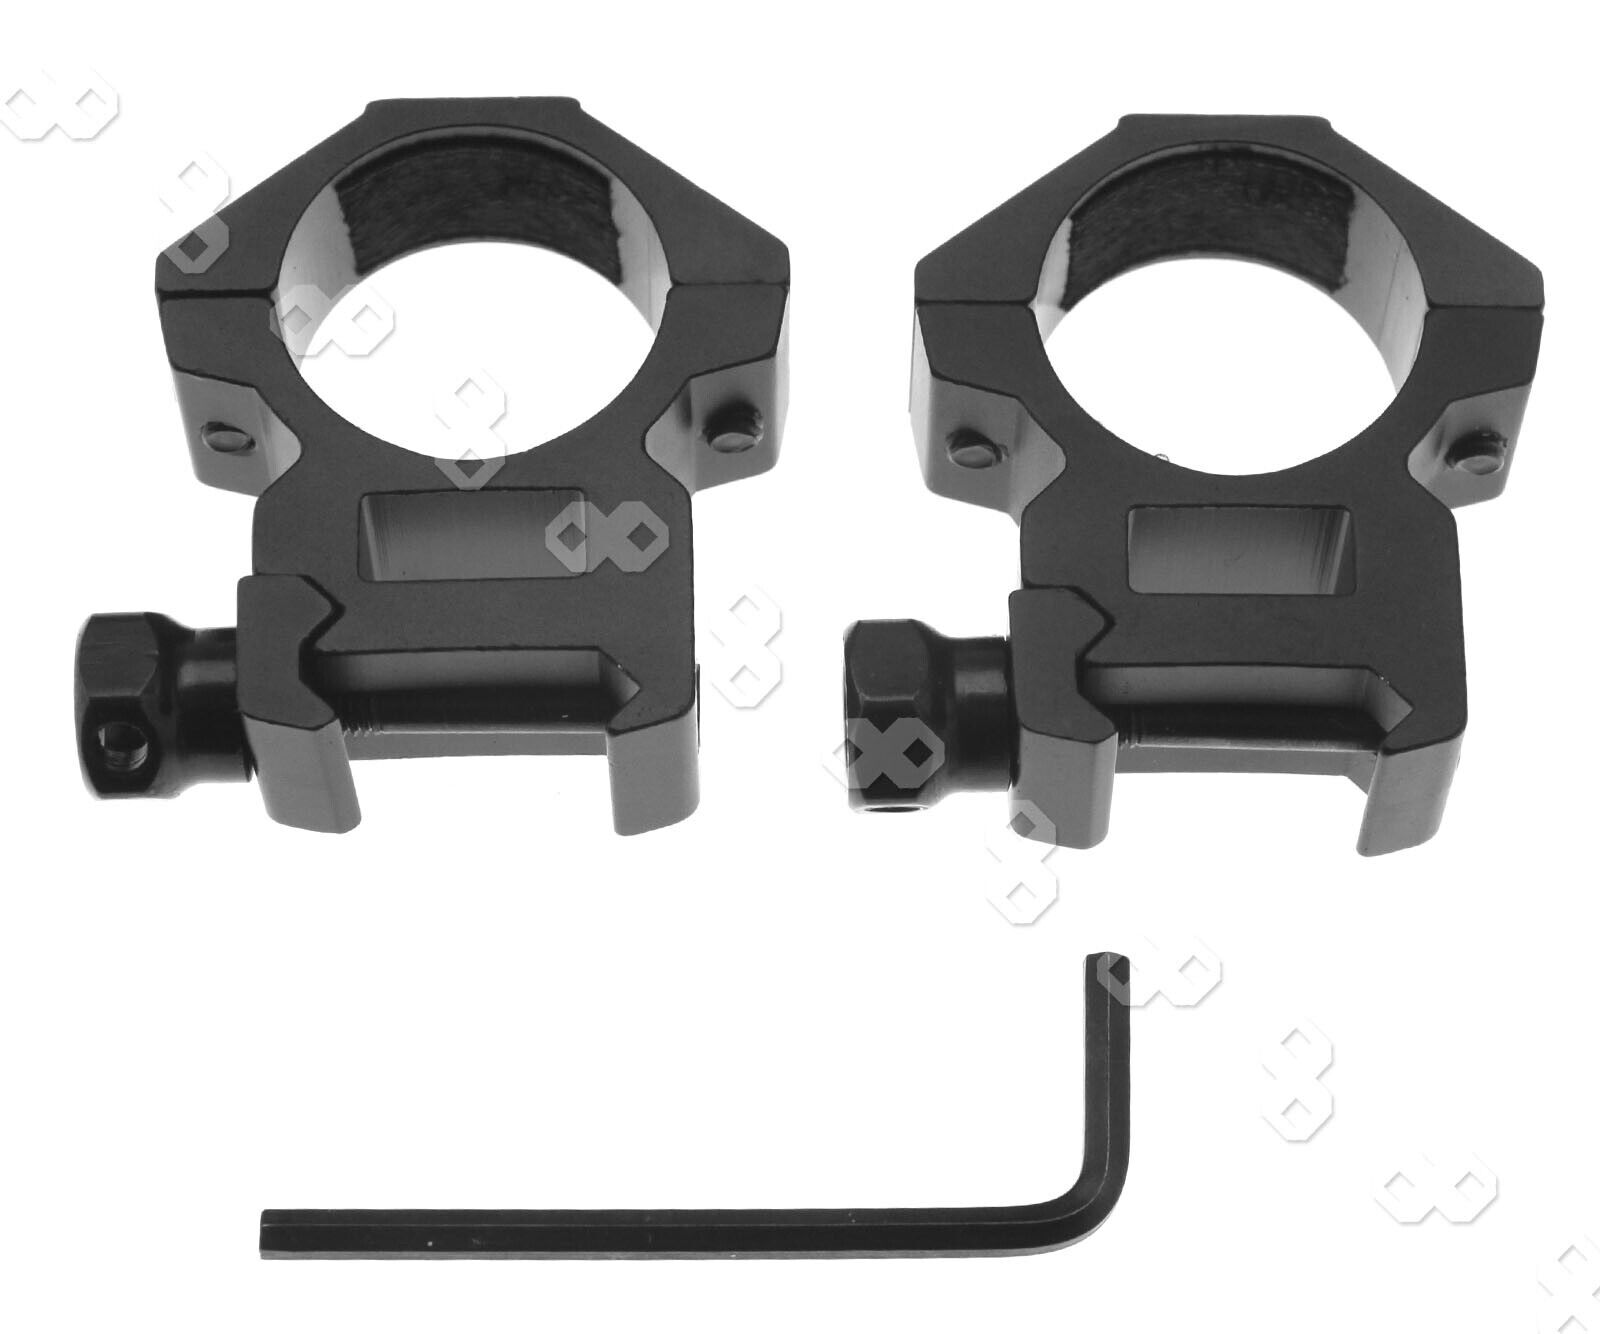 Pair of Quick Release 25mm Torch Flashlight Rail Mount 20mm Ring Weaver Scope